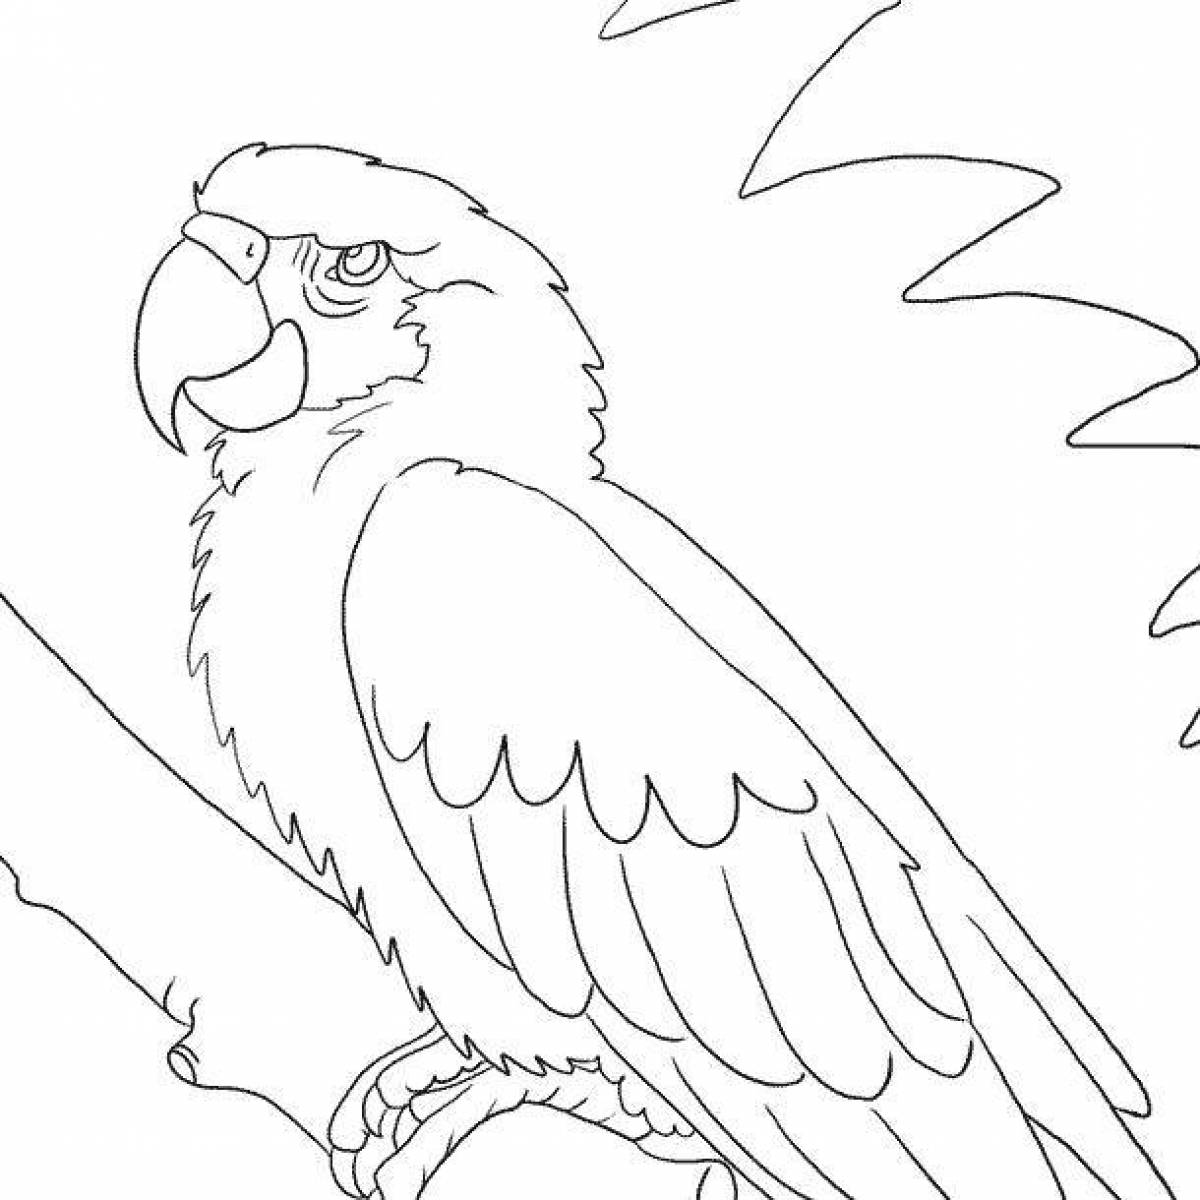 Coloring page cheerful macaw parrot